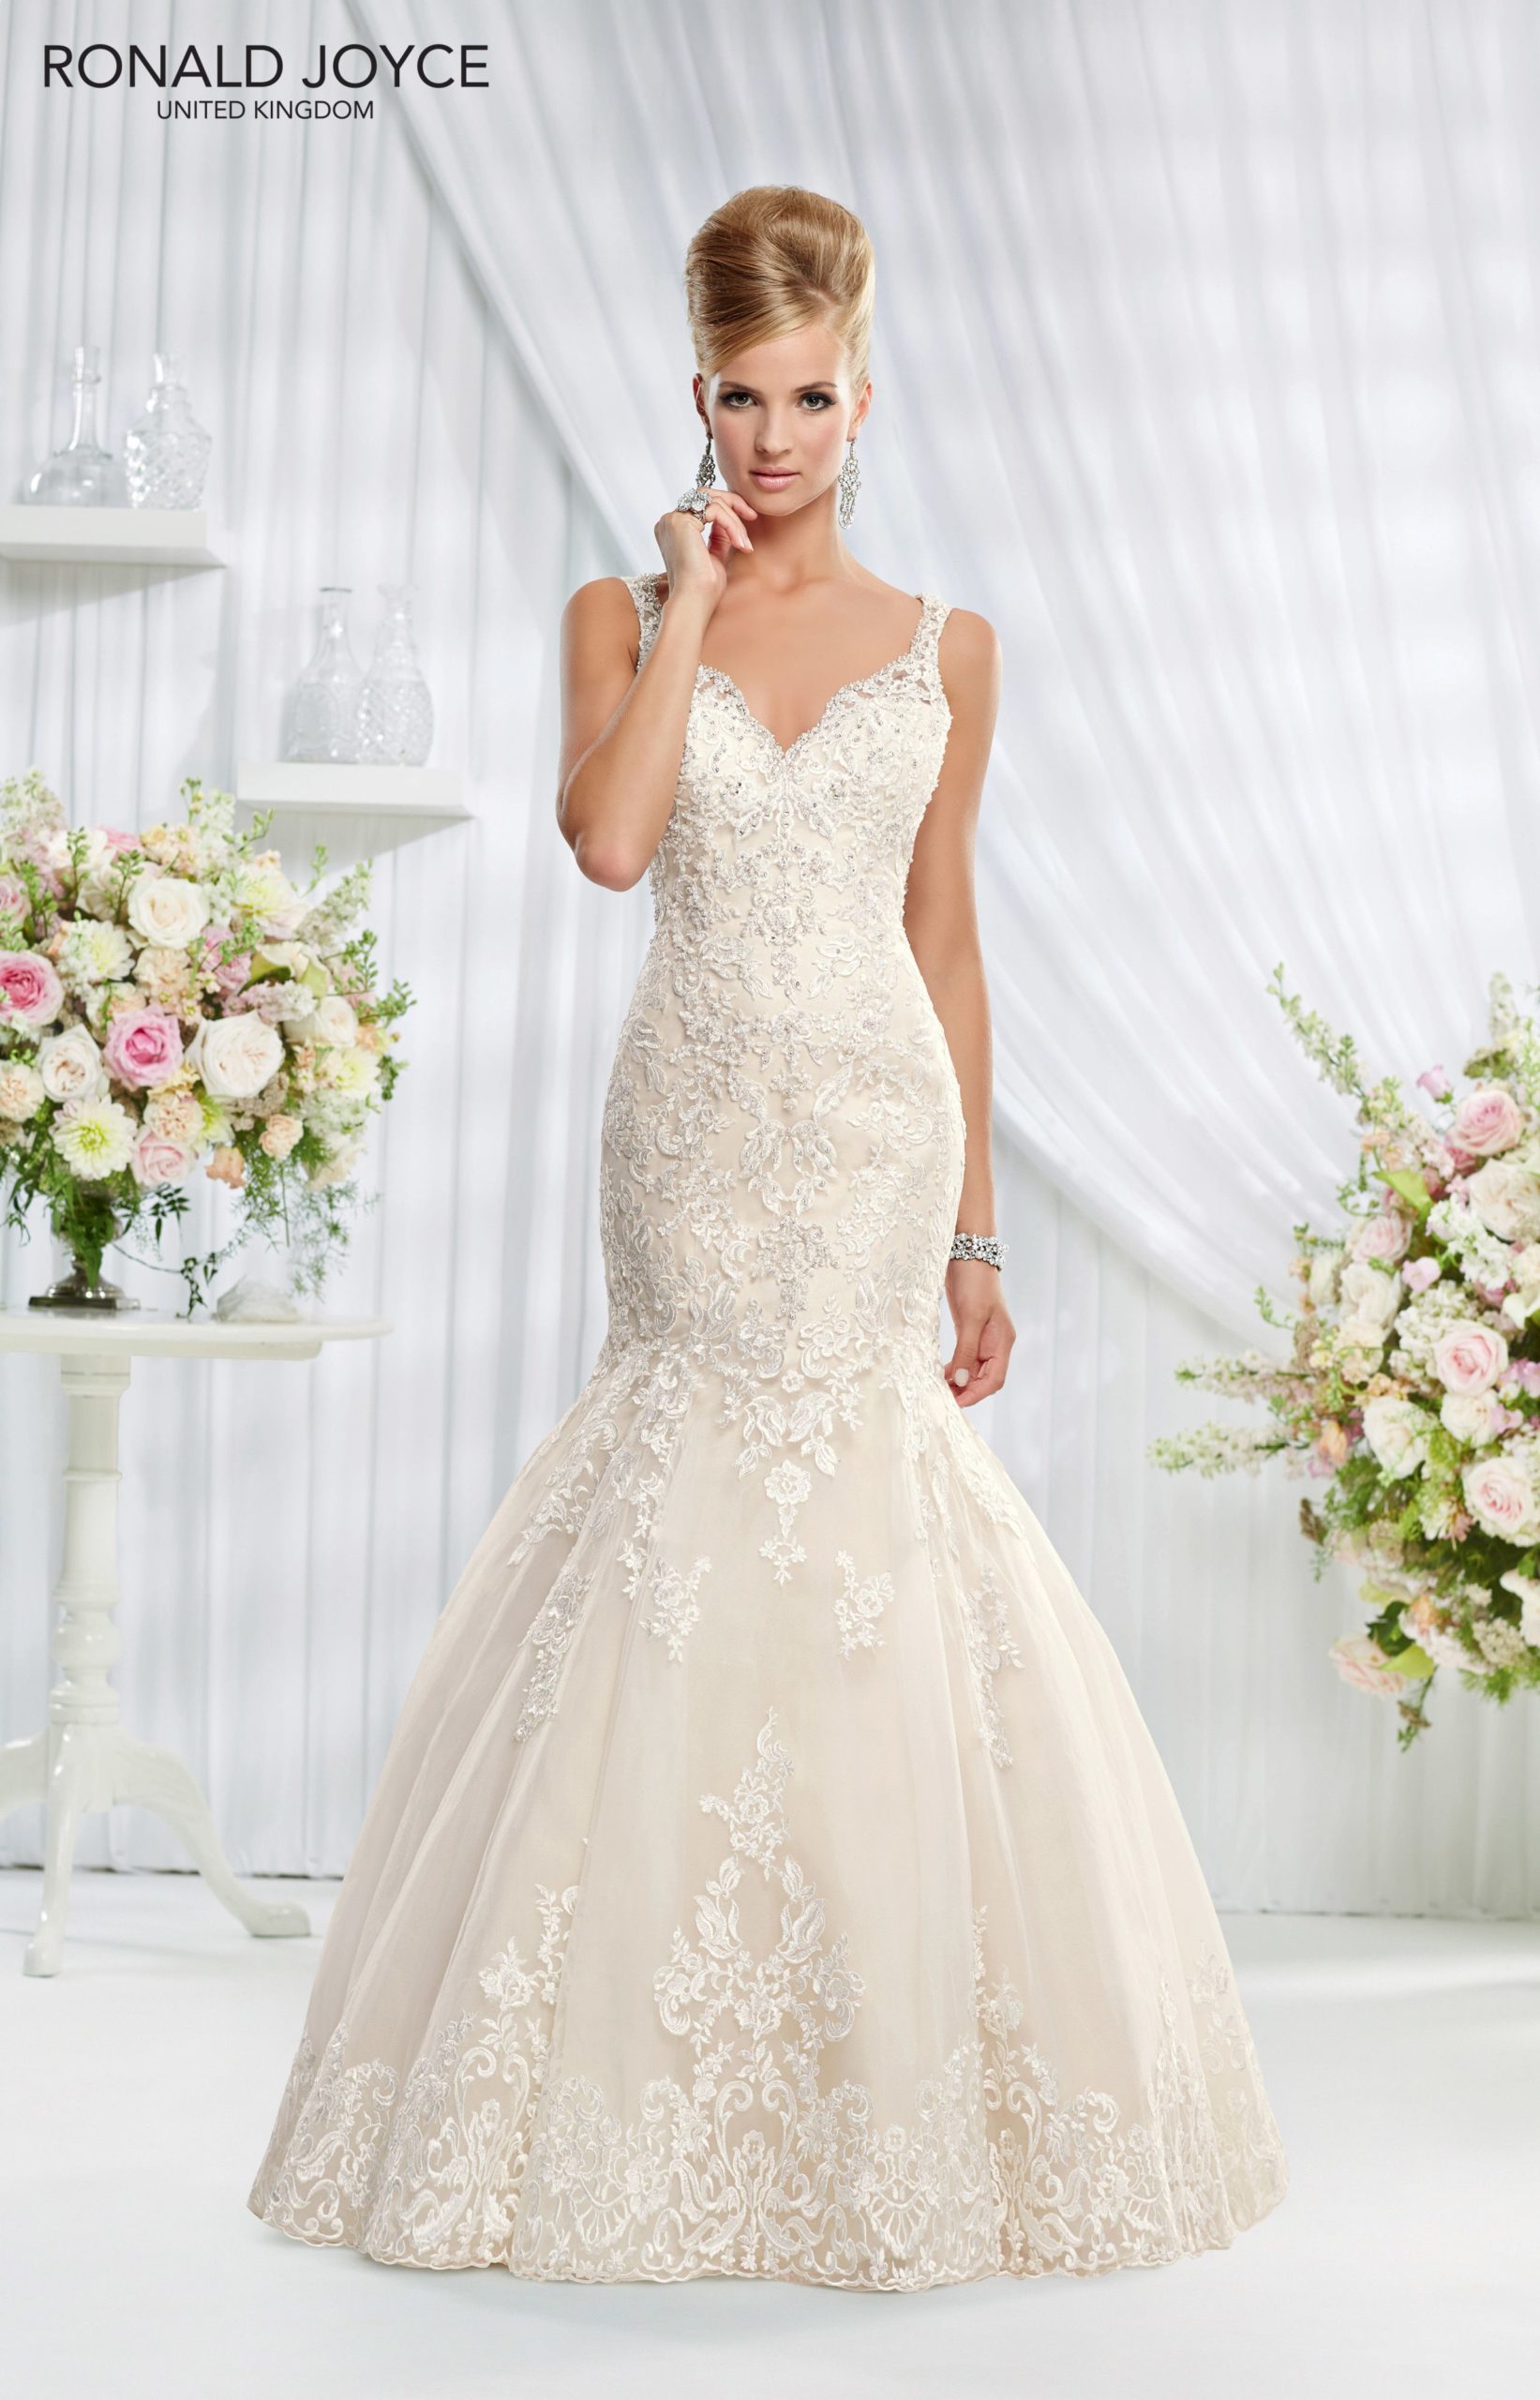 Erin, Lace fishtail wedding dress with beaded back detail